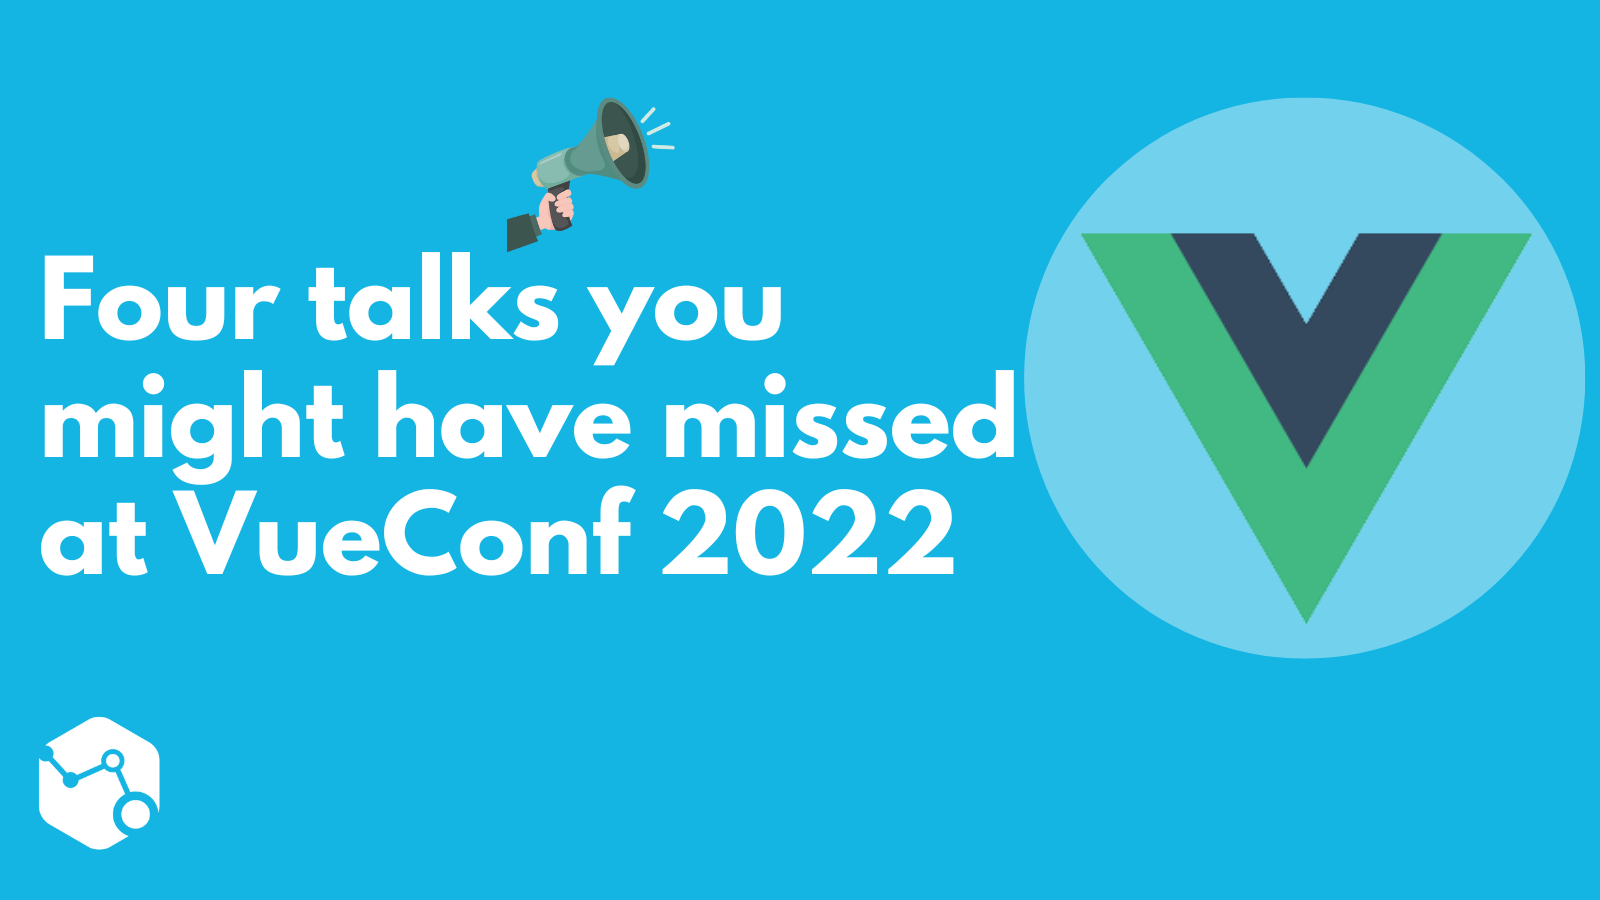 Four talks you might have missed at VueConf 2022